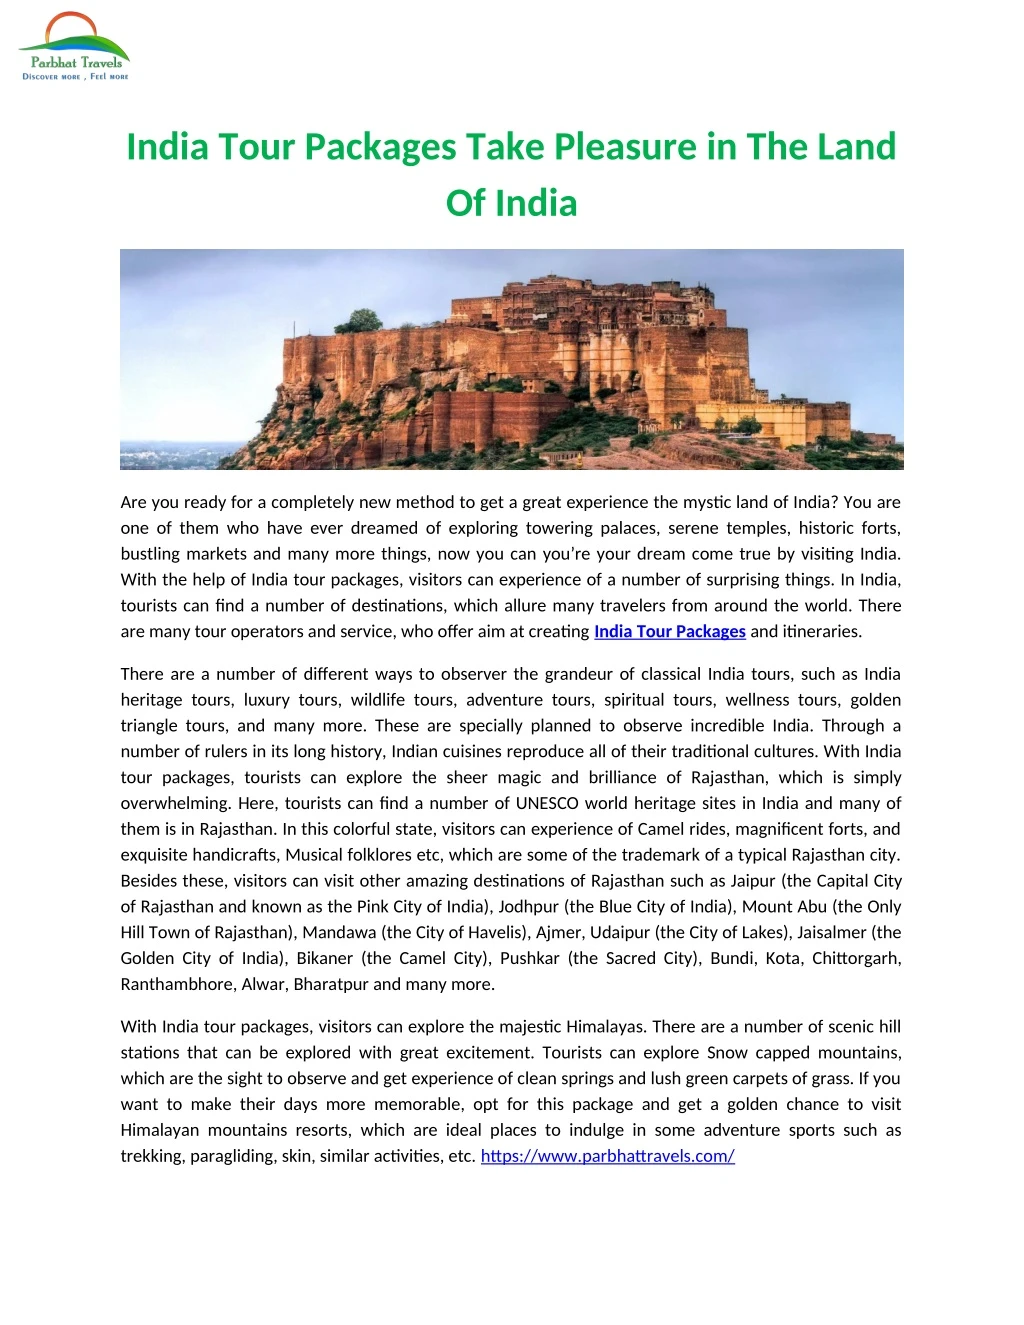 india tour packages take pleasure in the land